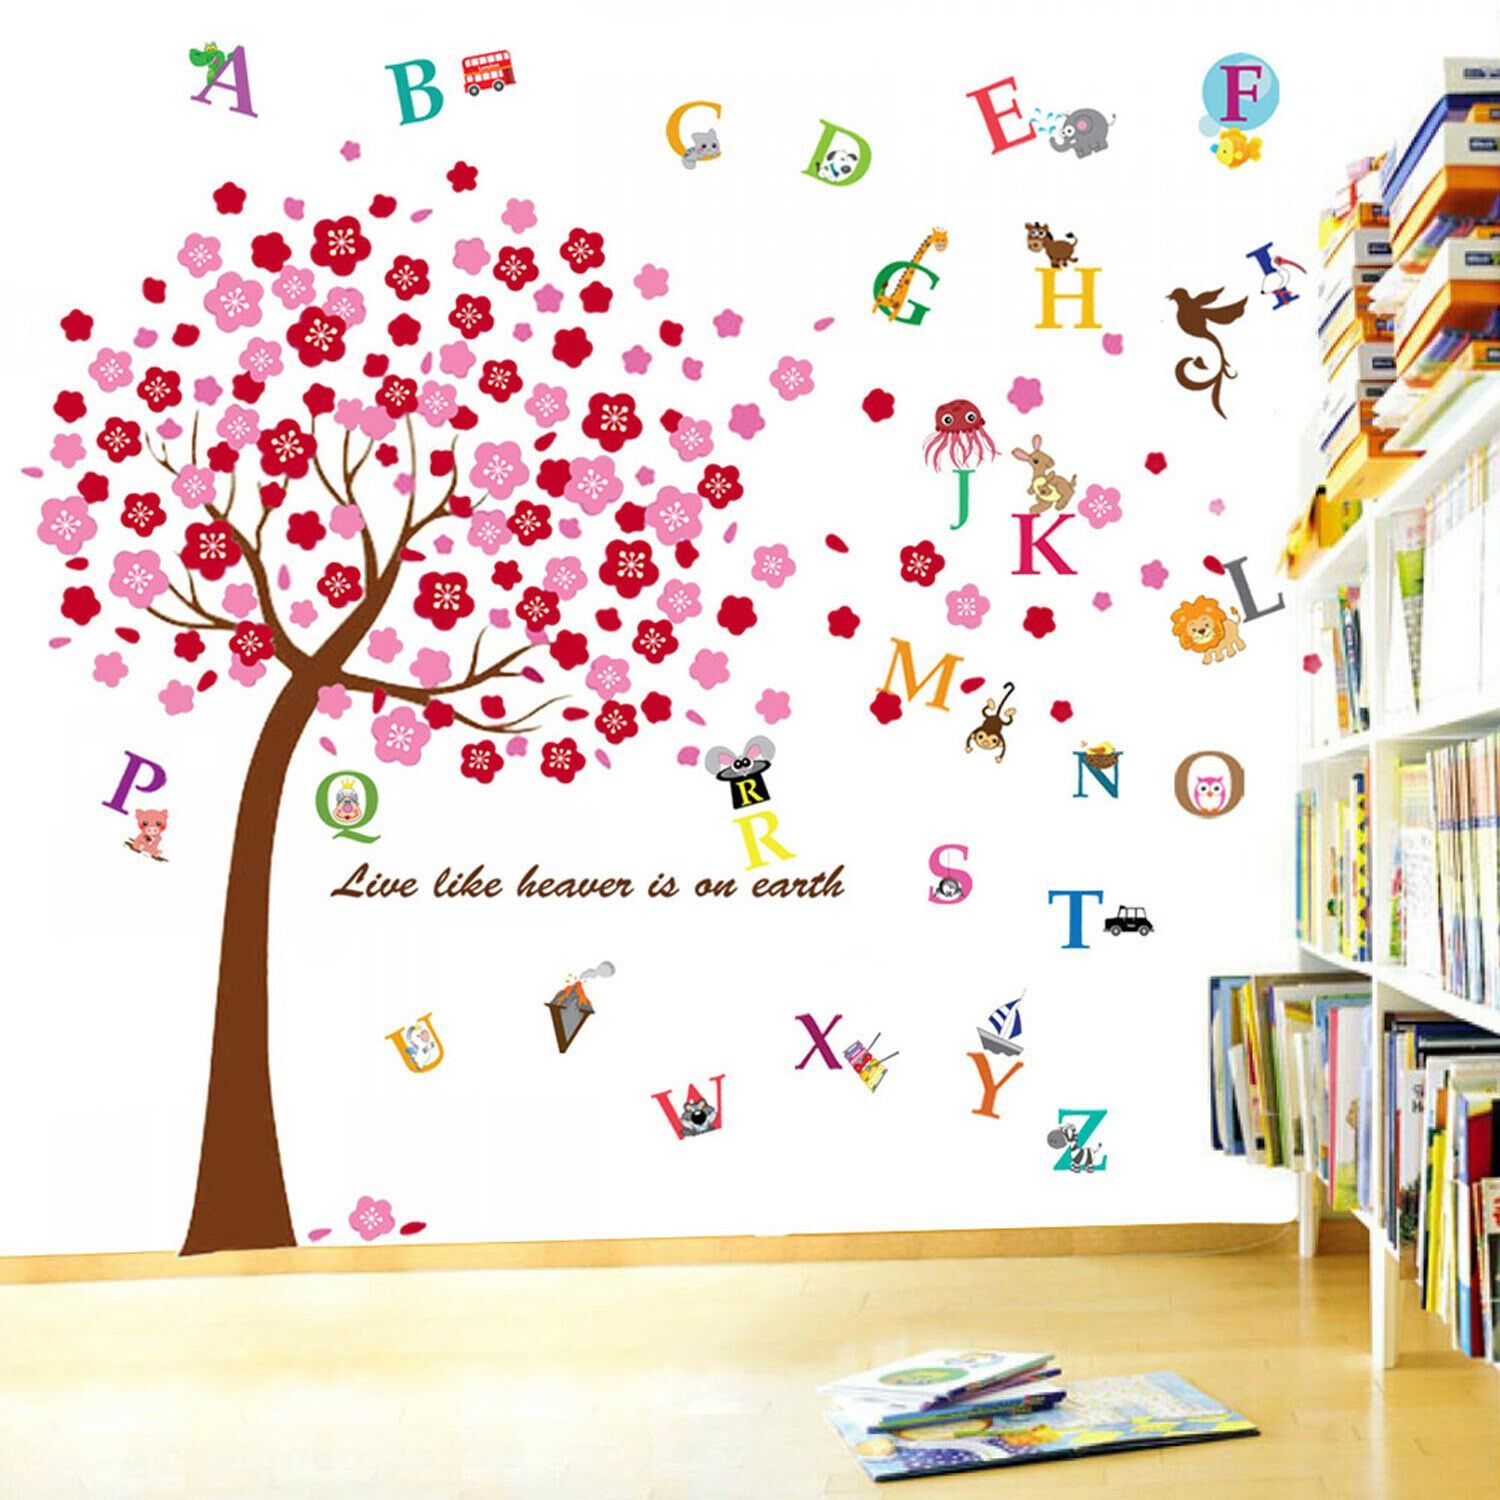 - Transform your room with the stunning Walplus wall sticker collection.
- Walplus' high quality self-adhesive stickers are quick to apply, and can be easily removed and repositioned without damage.
- Simply peel and stick to any smooth, even surface.
- Application instructions included, Eco-friendly materials and Non-toxic.